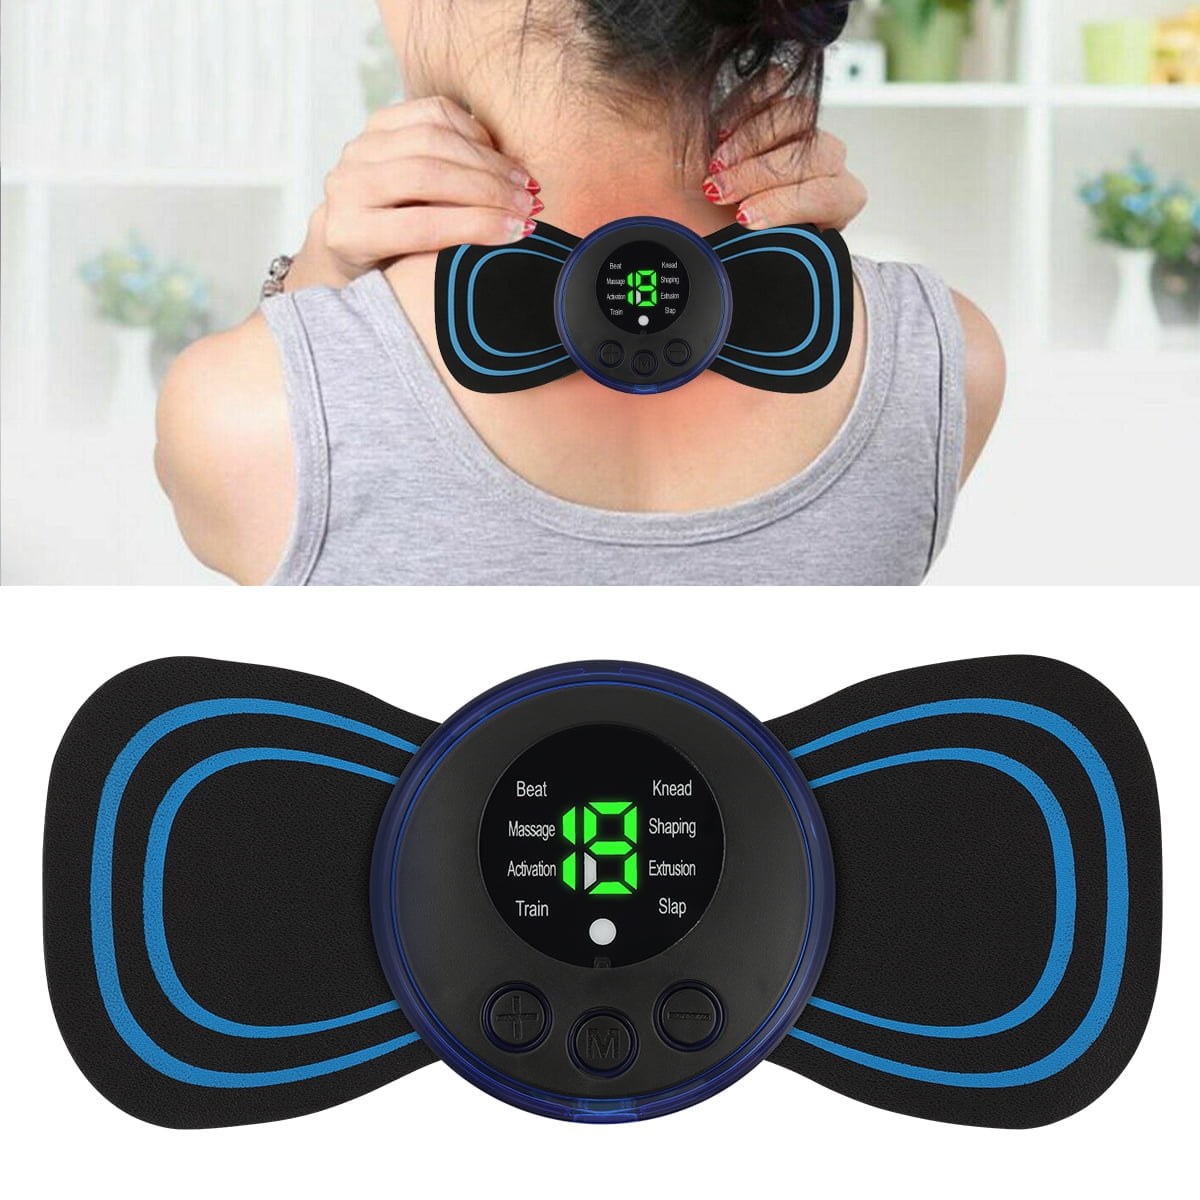  RBX Portable Neck Massager Electric Neck Massager, Electric  Pulse Neck Massager for Pain Relief TENS Massager : Health & Household